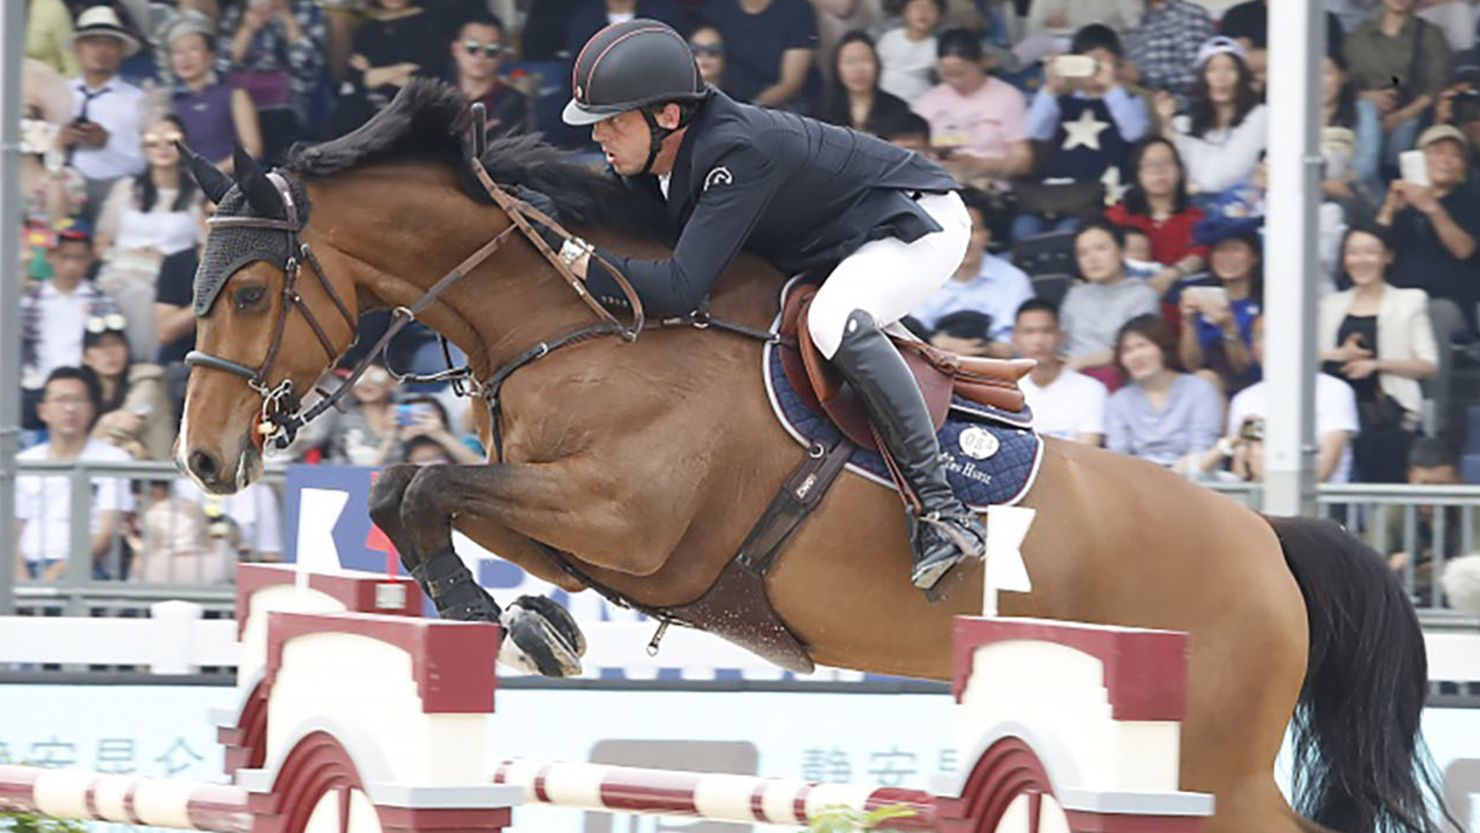 Harrie Smolders will be competing in his second event of the Global Champions season.